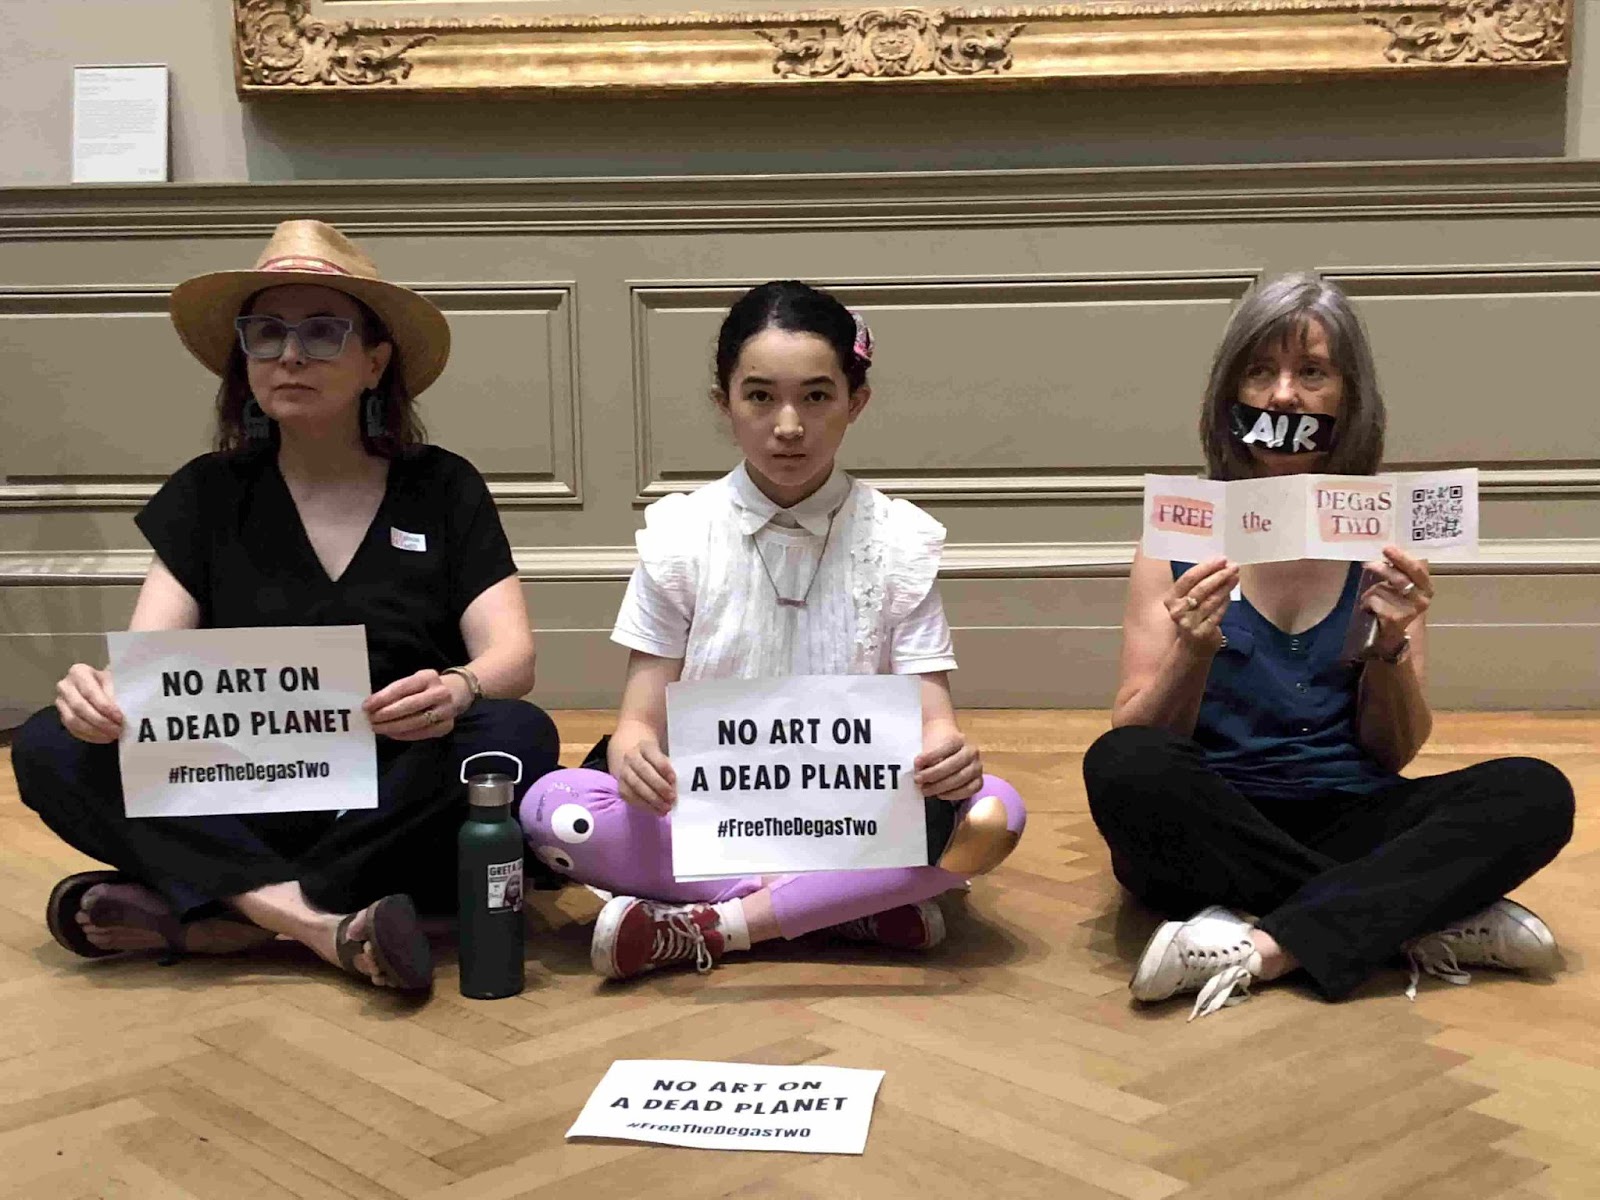 Rebels sit silently with signs that say 'no art on a dead planet'.